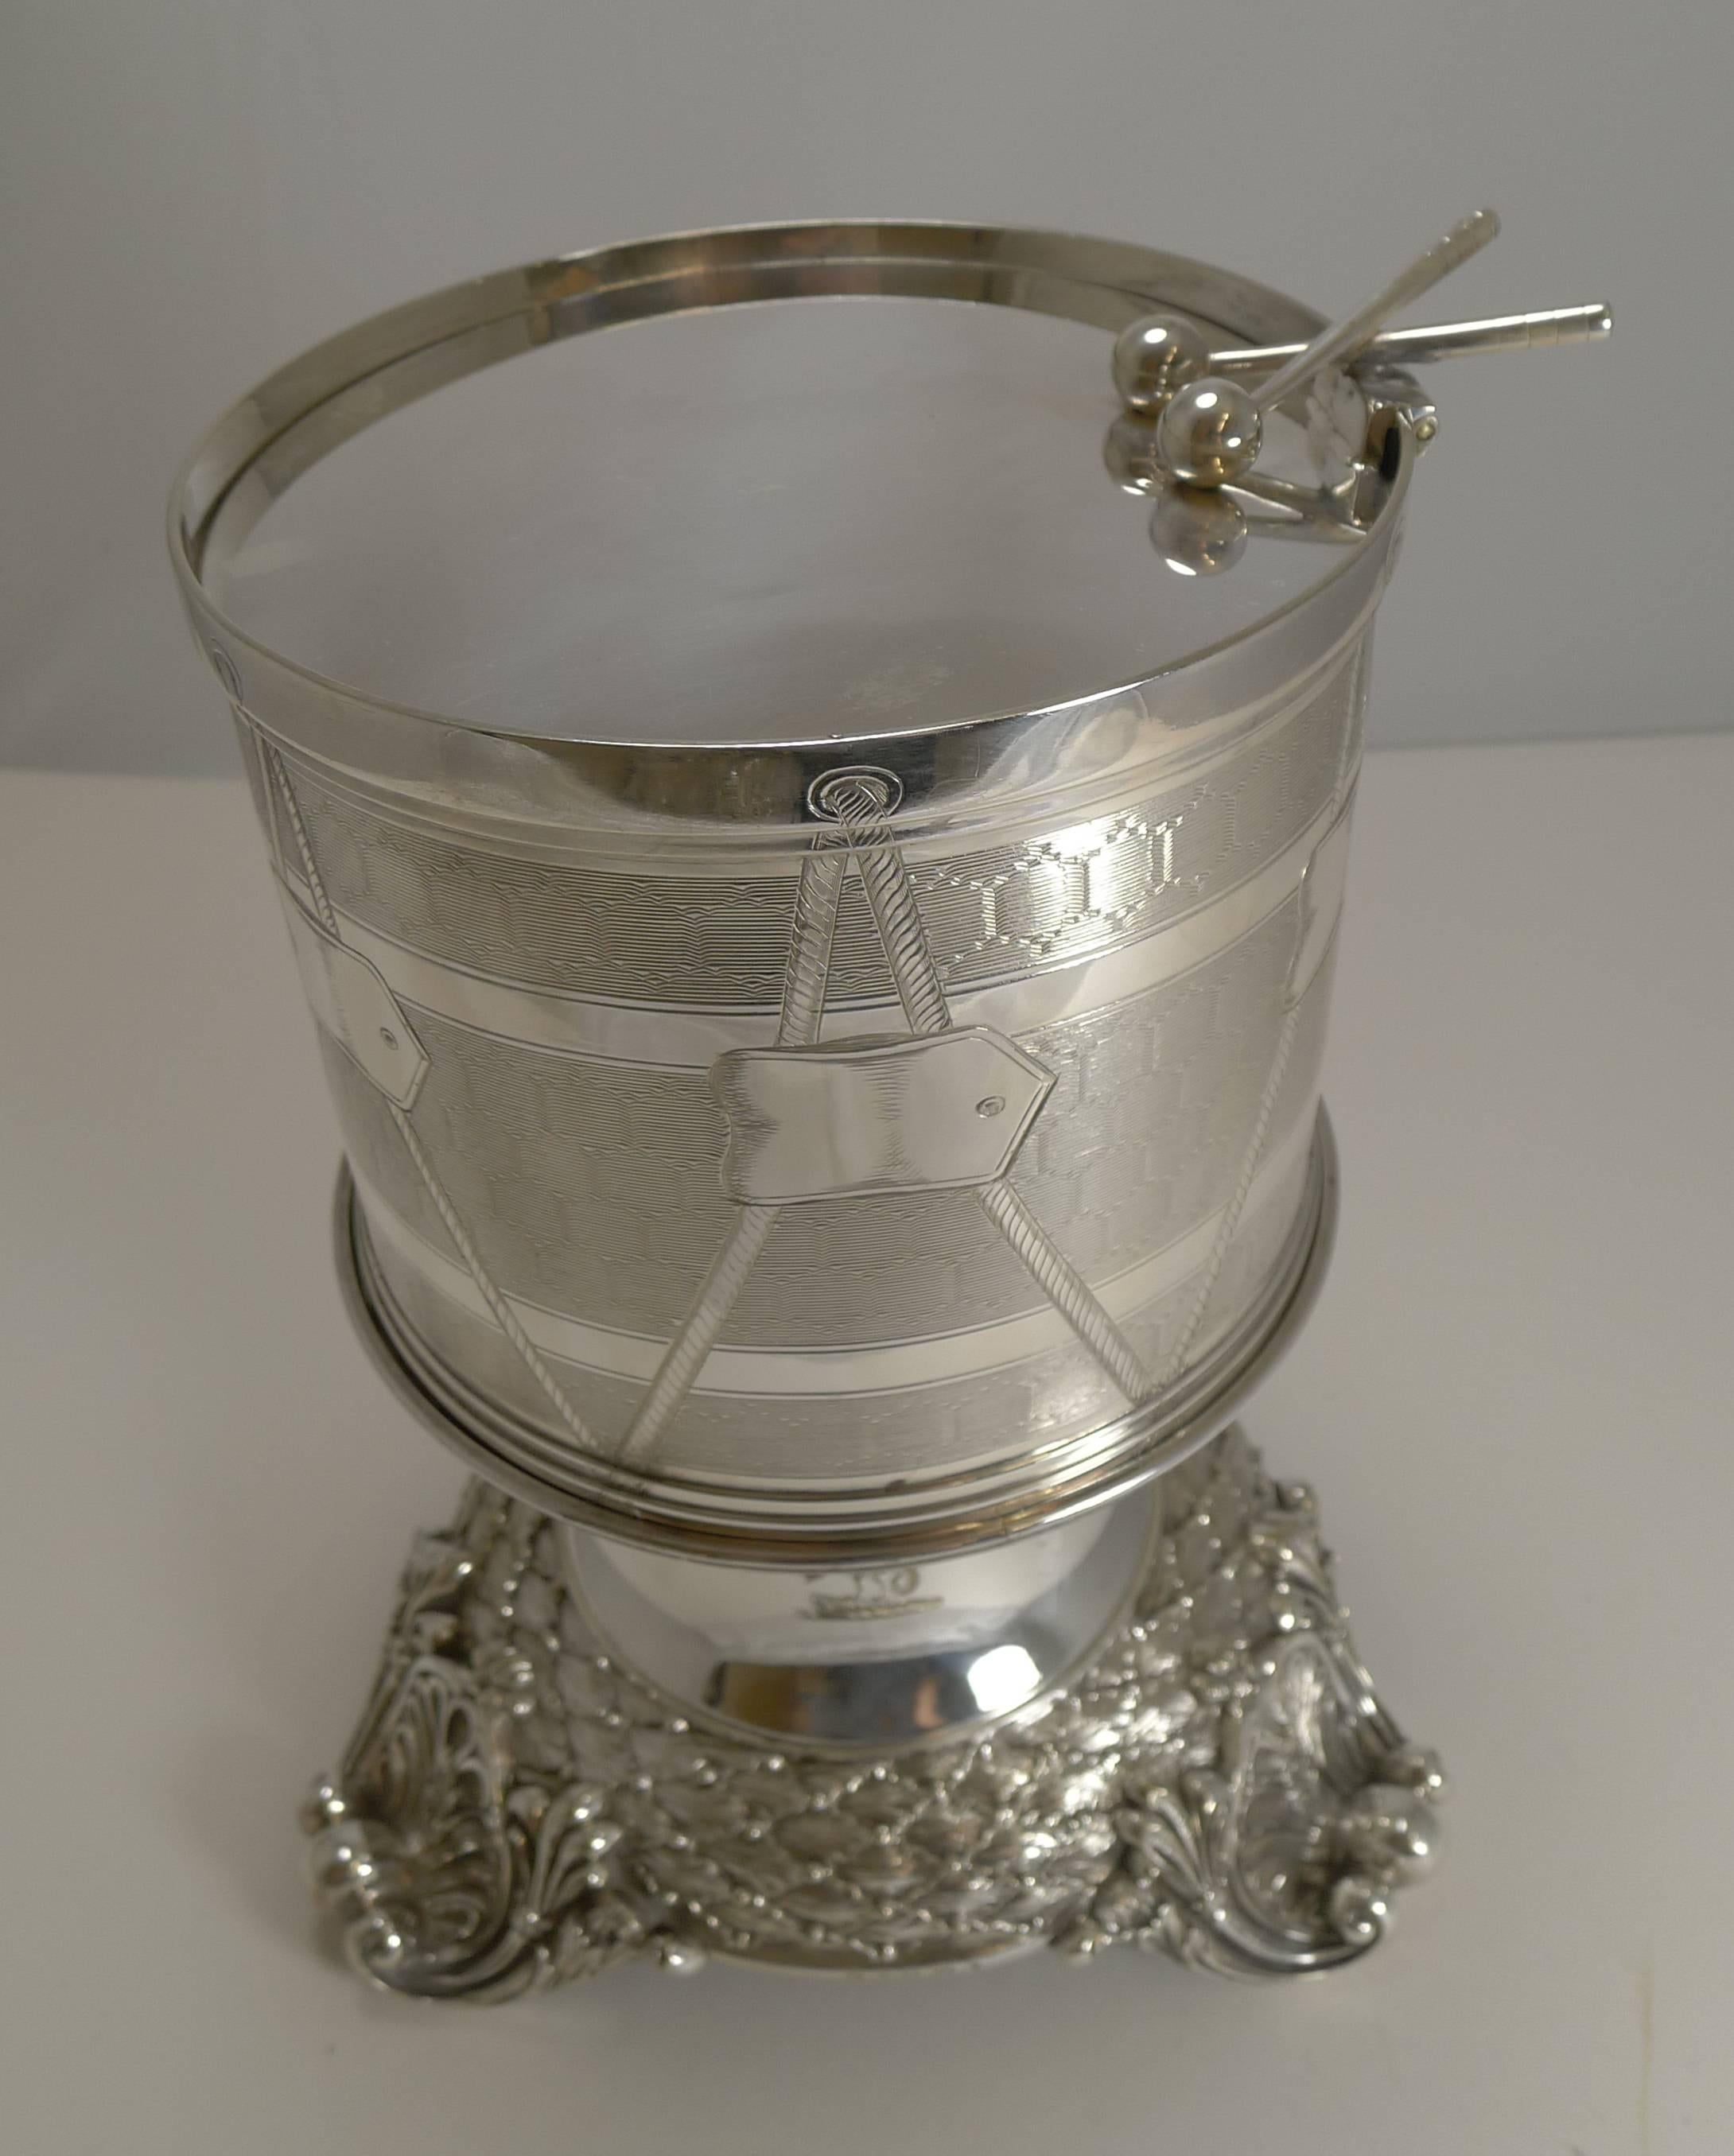 English Magnificent and Rare Early Silver Plated Drum Biscuit Box on Stand, 1844 For Sale